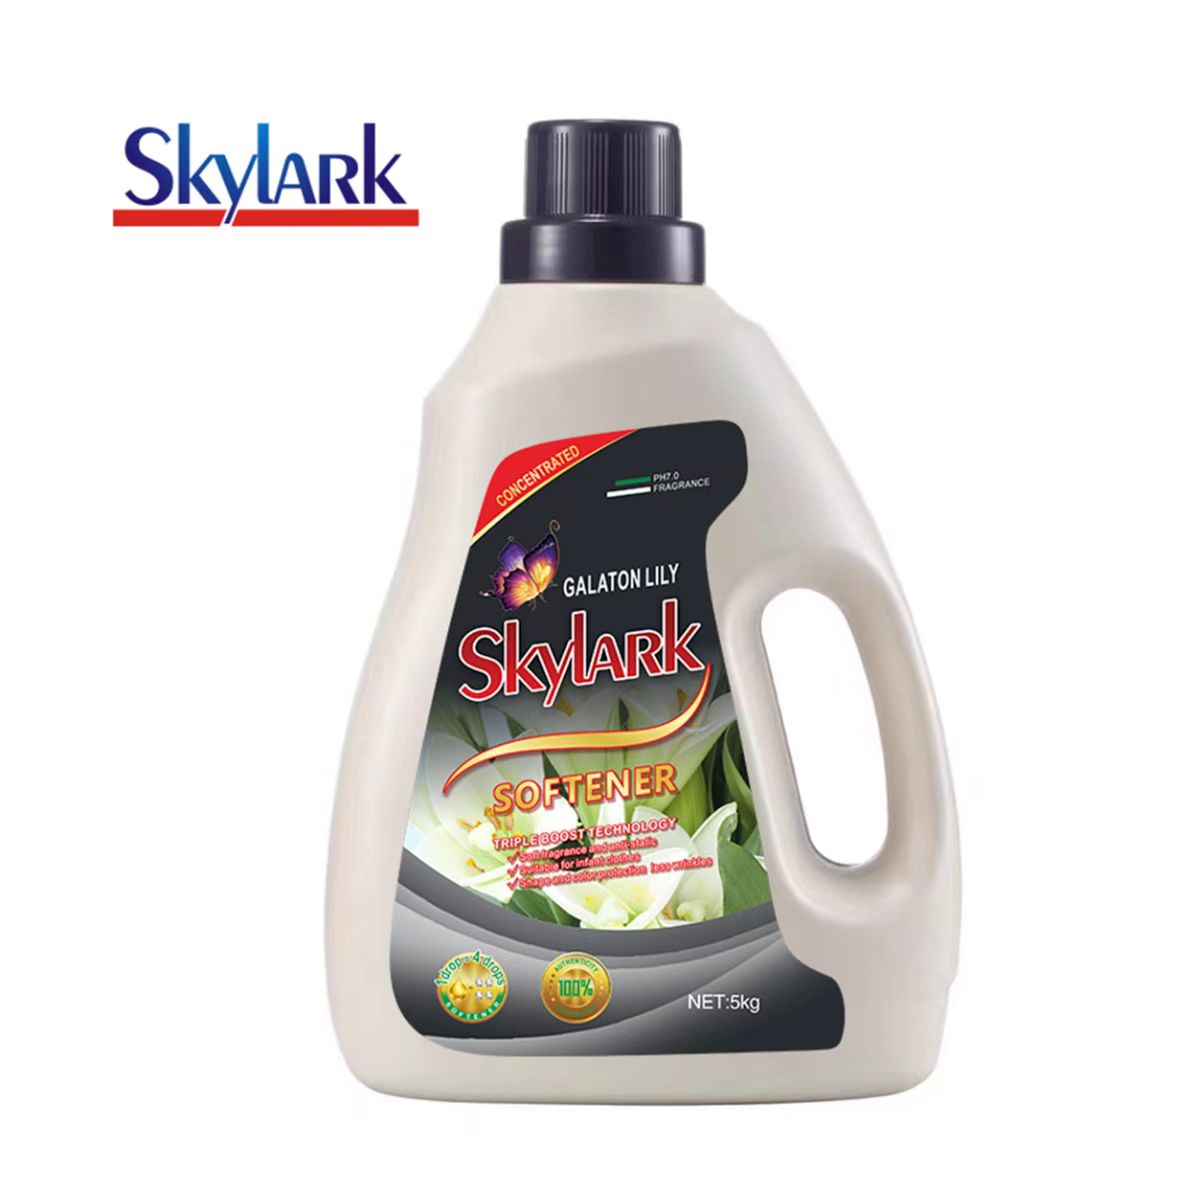 Super Galaton Lily Concentrated Type Fabric Softener Jeung Performance Alus